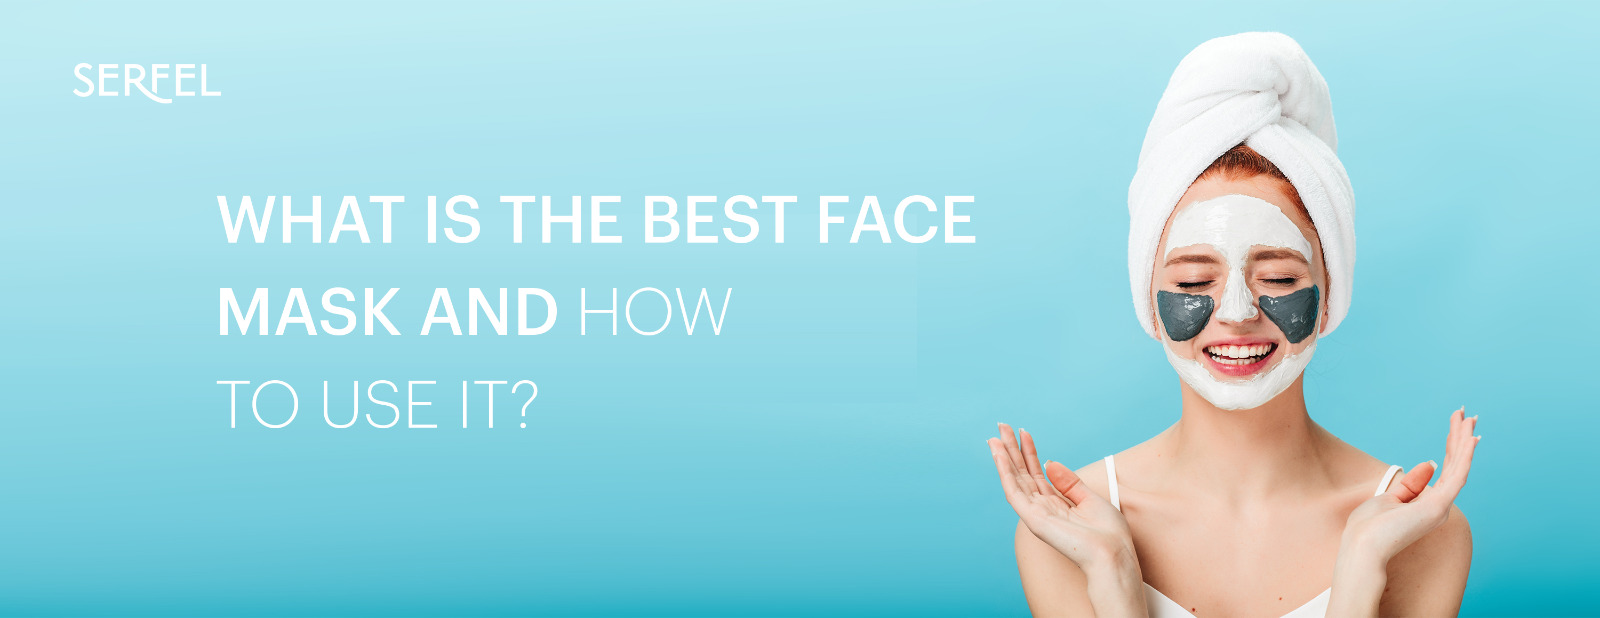 What is The Best Face Mask And How to Use It